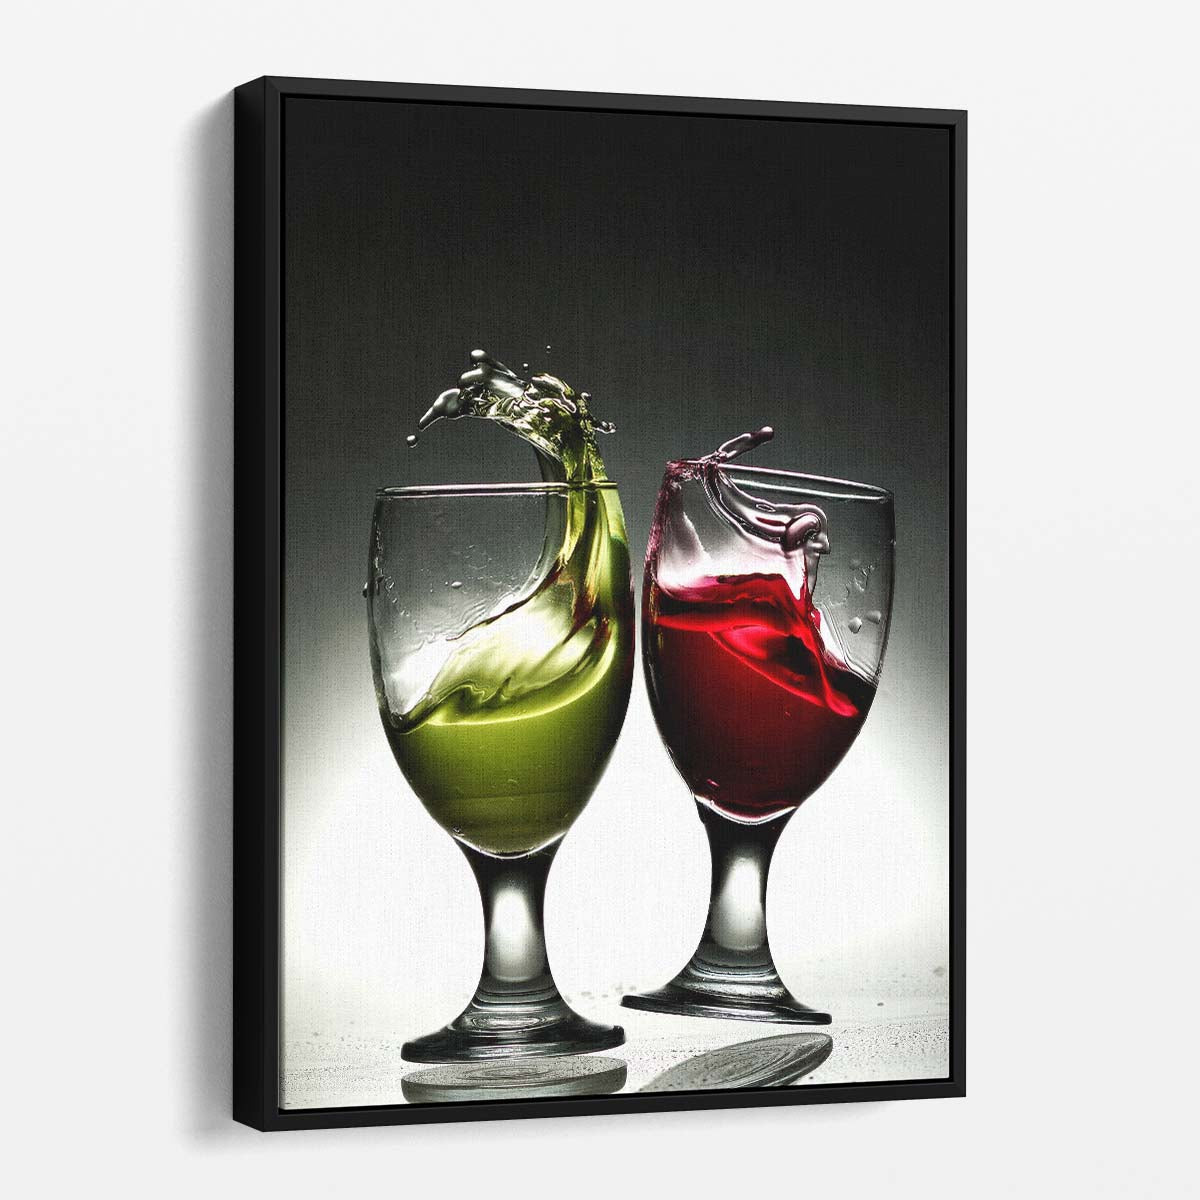 Conceptual Still Life Photography Dancing Wine Glass Splash Art by Luxuriance Designs, made in USA